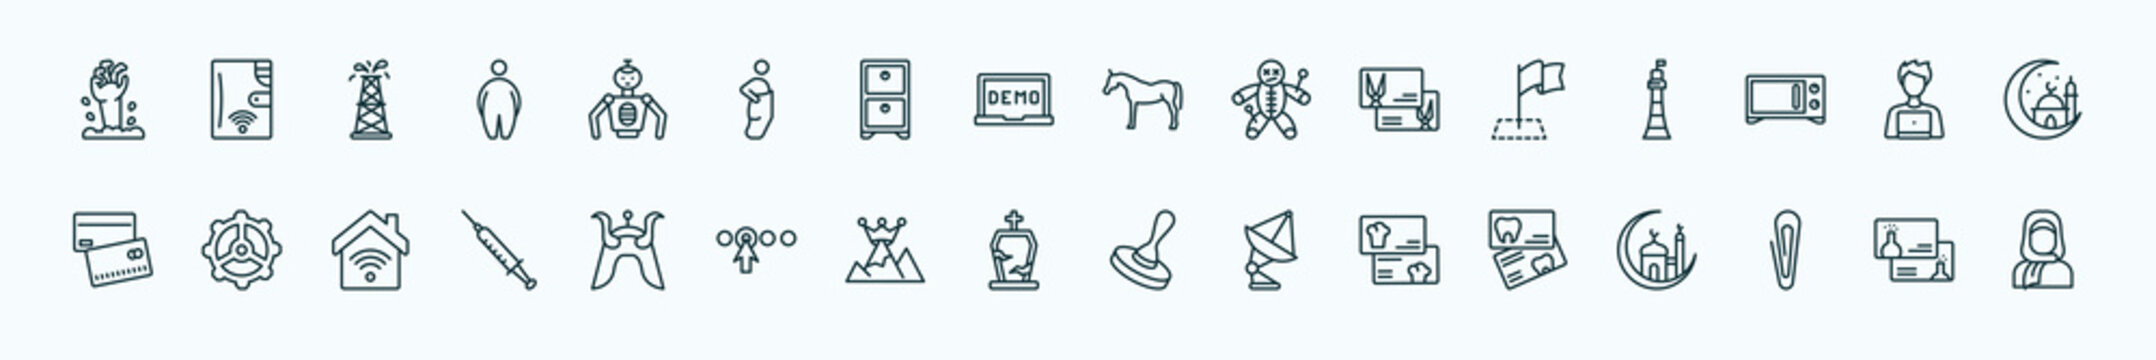 special lineal other icons set. outline icons such as zambie hand, robot of japan, arab horse, milestone, it specialist, tings, samurai head of japan, tombstone with cross, cook business card, metal